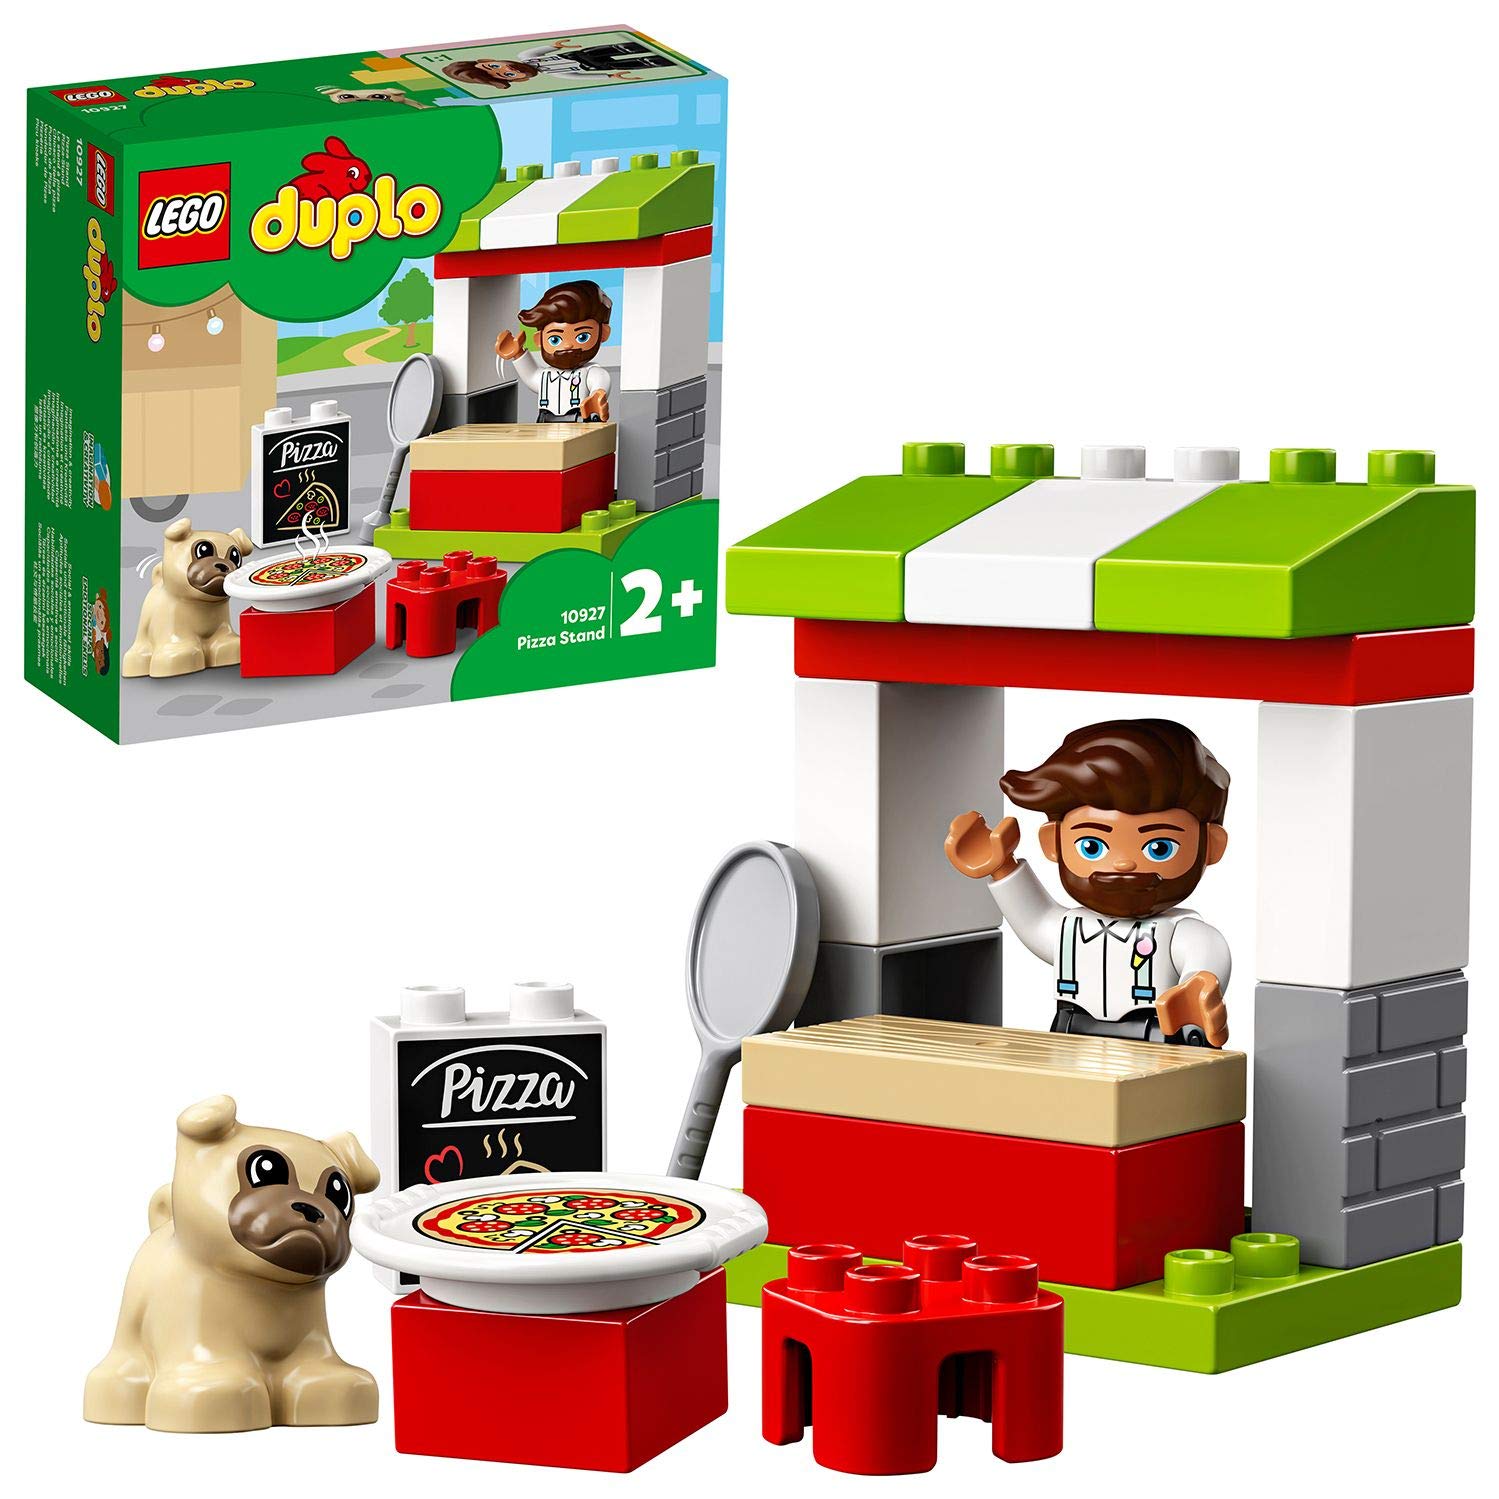 Lego 10927 Duplo Pizza Stand Playset With Pizza And A Dog Figure, Large Sto